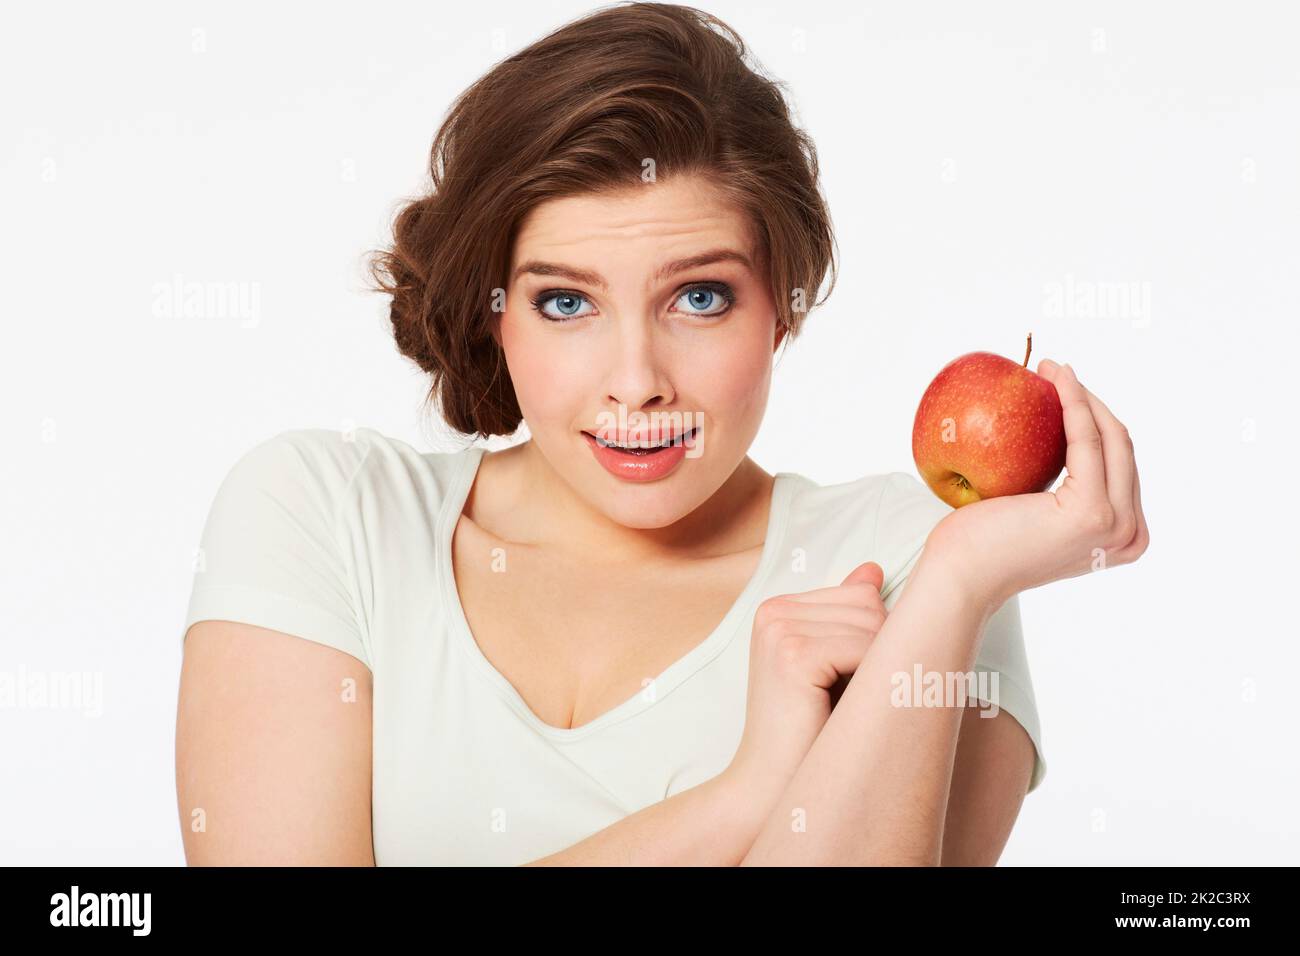 The healthy choice. Portrait of a pretty brunette woman holding a red apple. Stock Photo